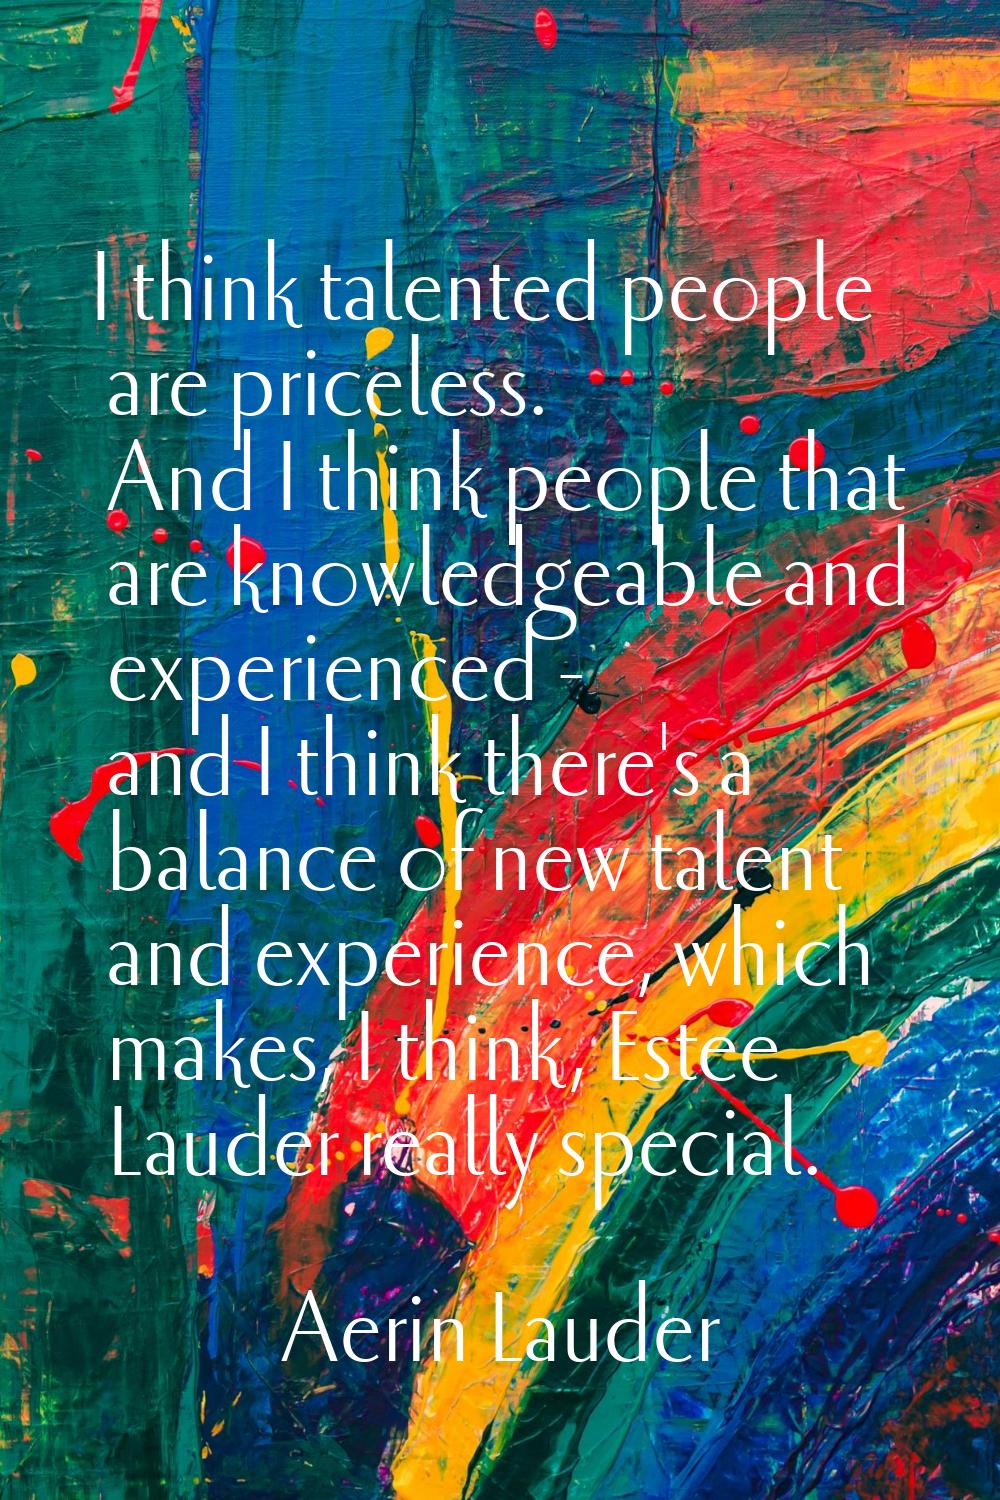 I think talented people are priceless. And I think people that are knowledgeable and experienced - 